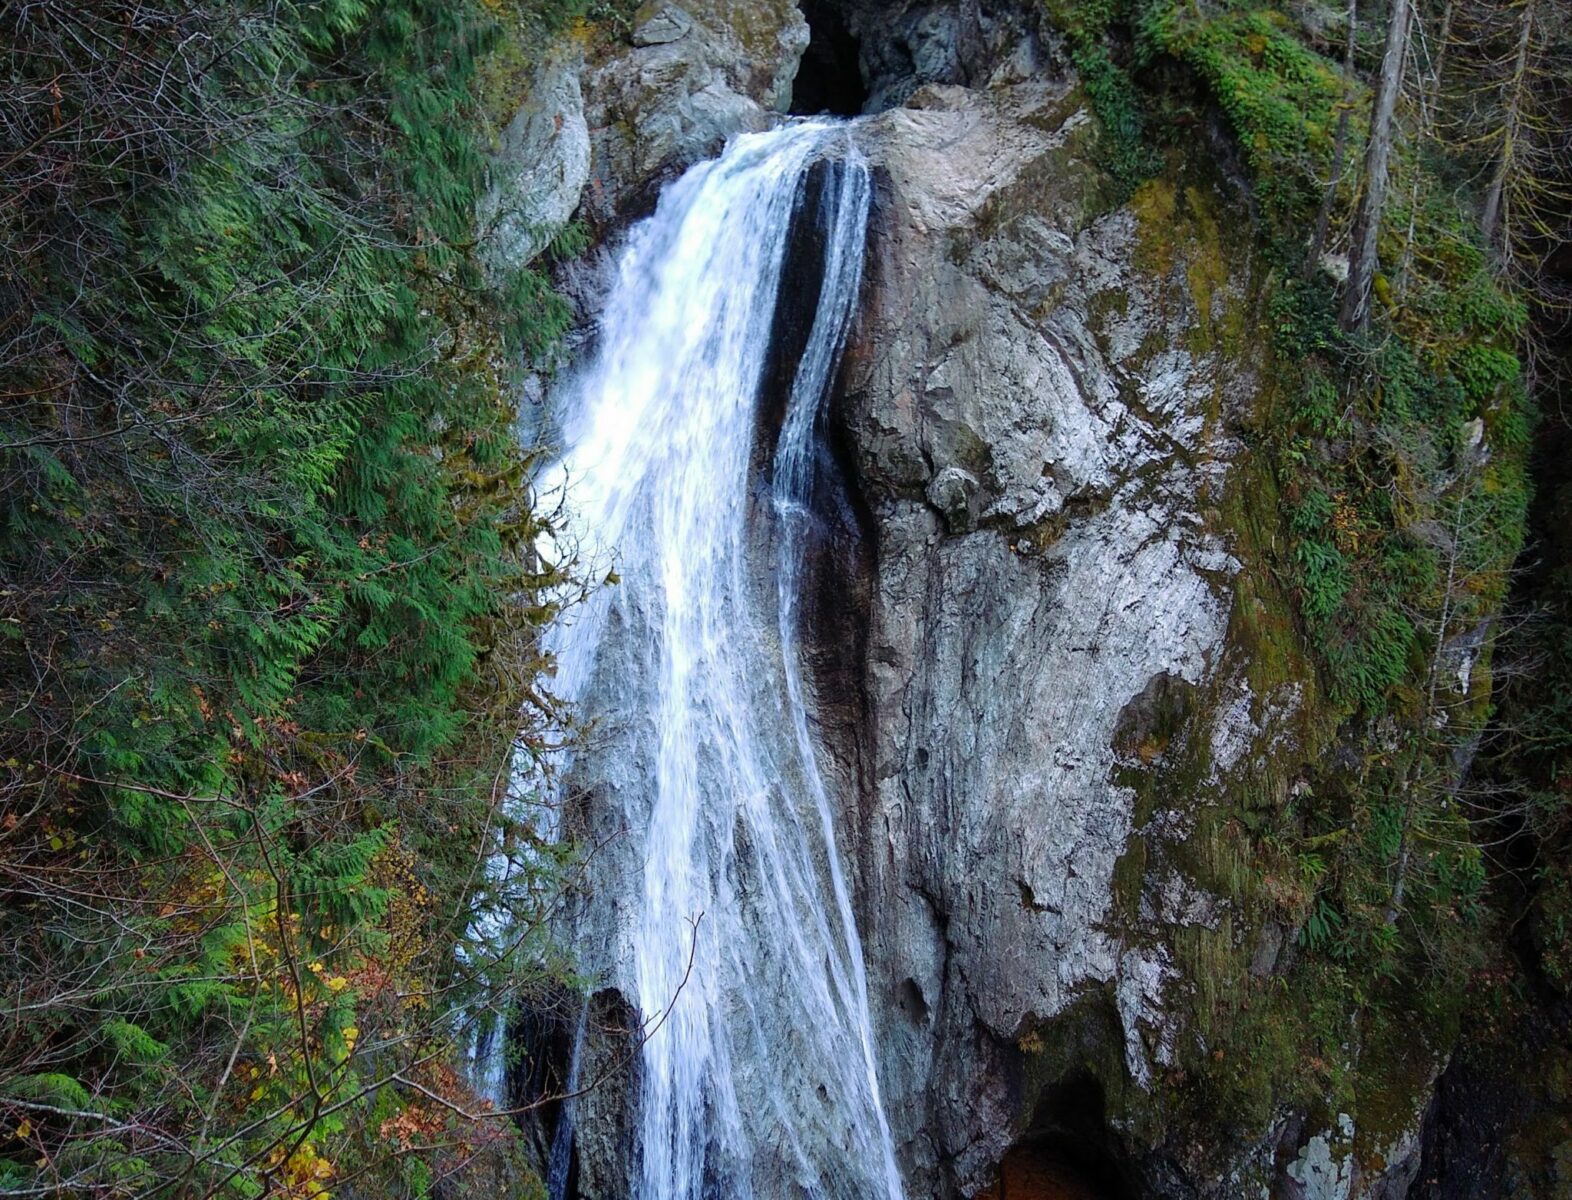 A wide and high waterfall cascades over a vertical rock face. There are trees and green shrubs around it